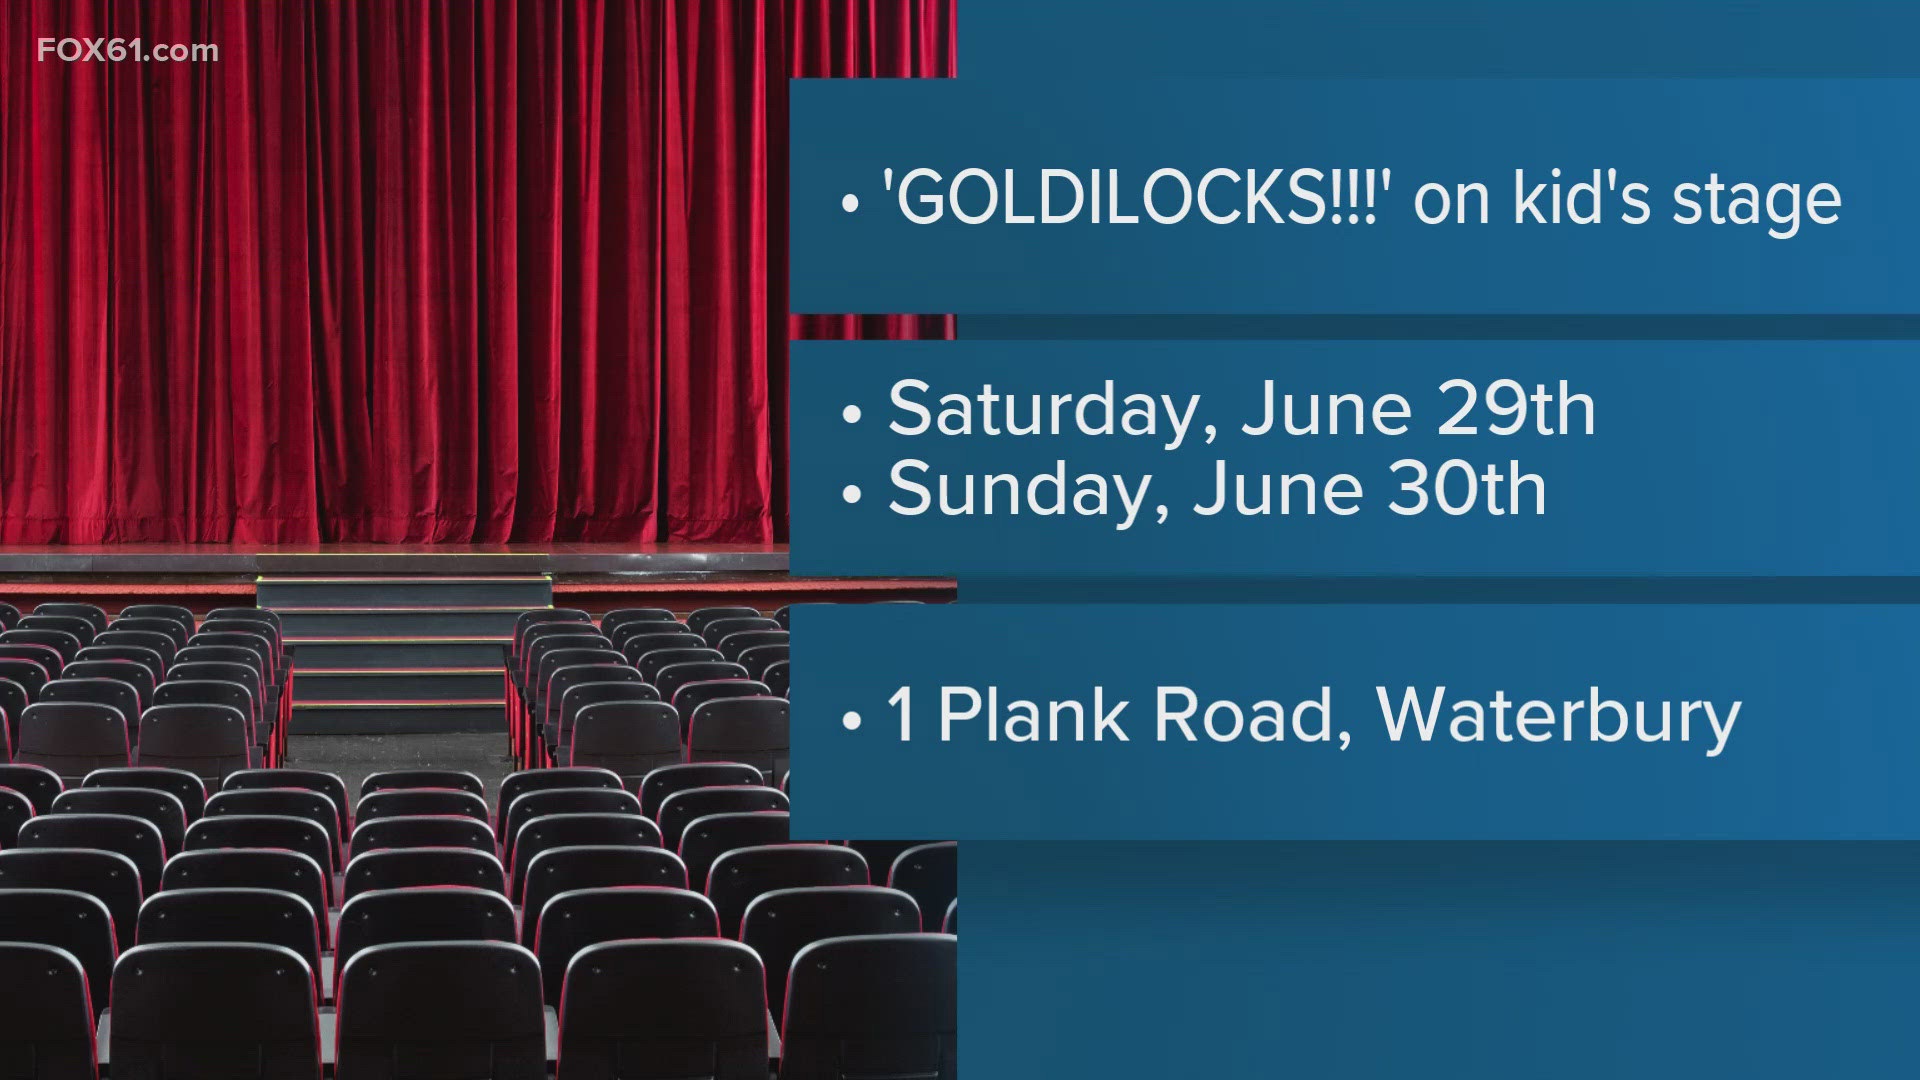 Simone LoCastro and Scott Kealy with the show "GOLDILOCKS!!!" discuss the upcoming show playing this weekend!